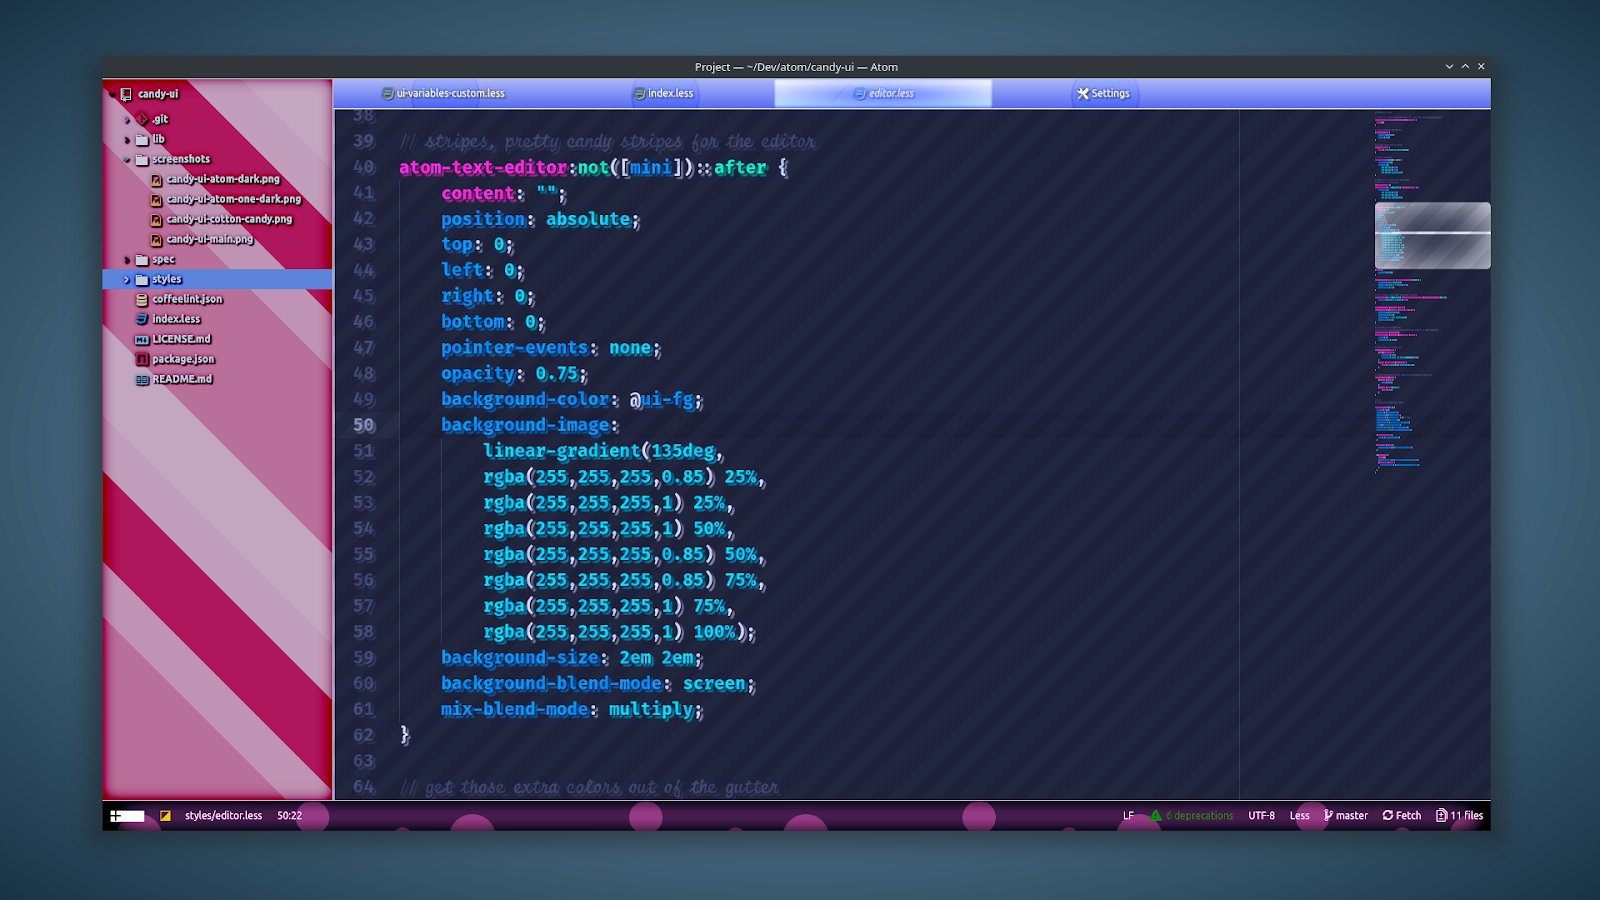 a screenshot of the "candy UI" theme for the Atom text editor.  The tree view has diagonal stripes in different shades of pink. The editor has diagonal stripes in dark blue. Editor text is magenta, blue, and cyan, and has a gray drop shadow.